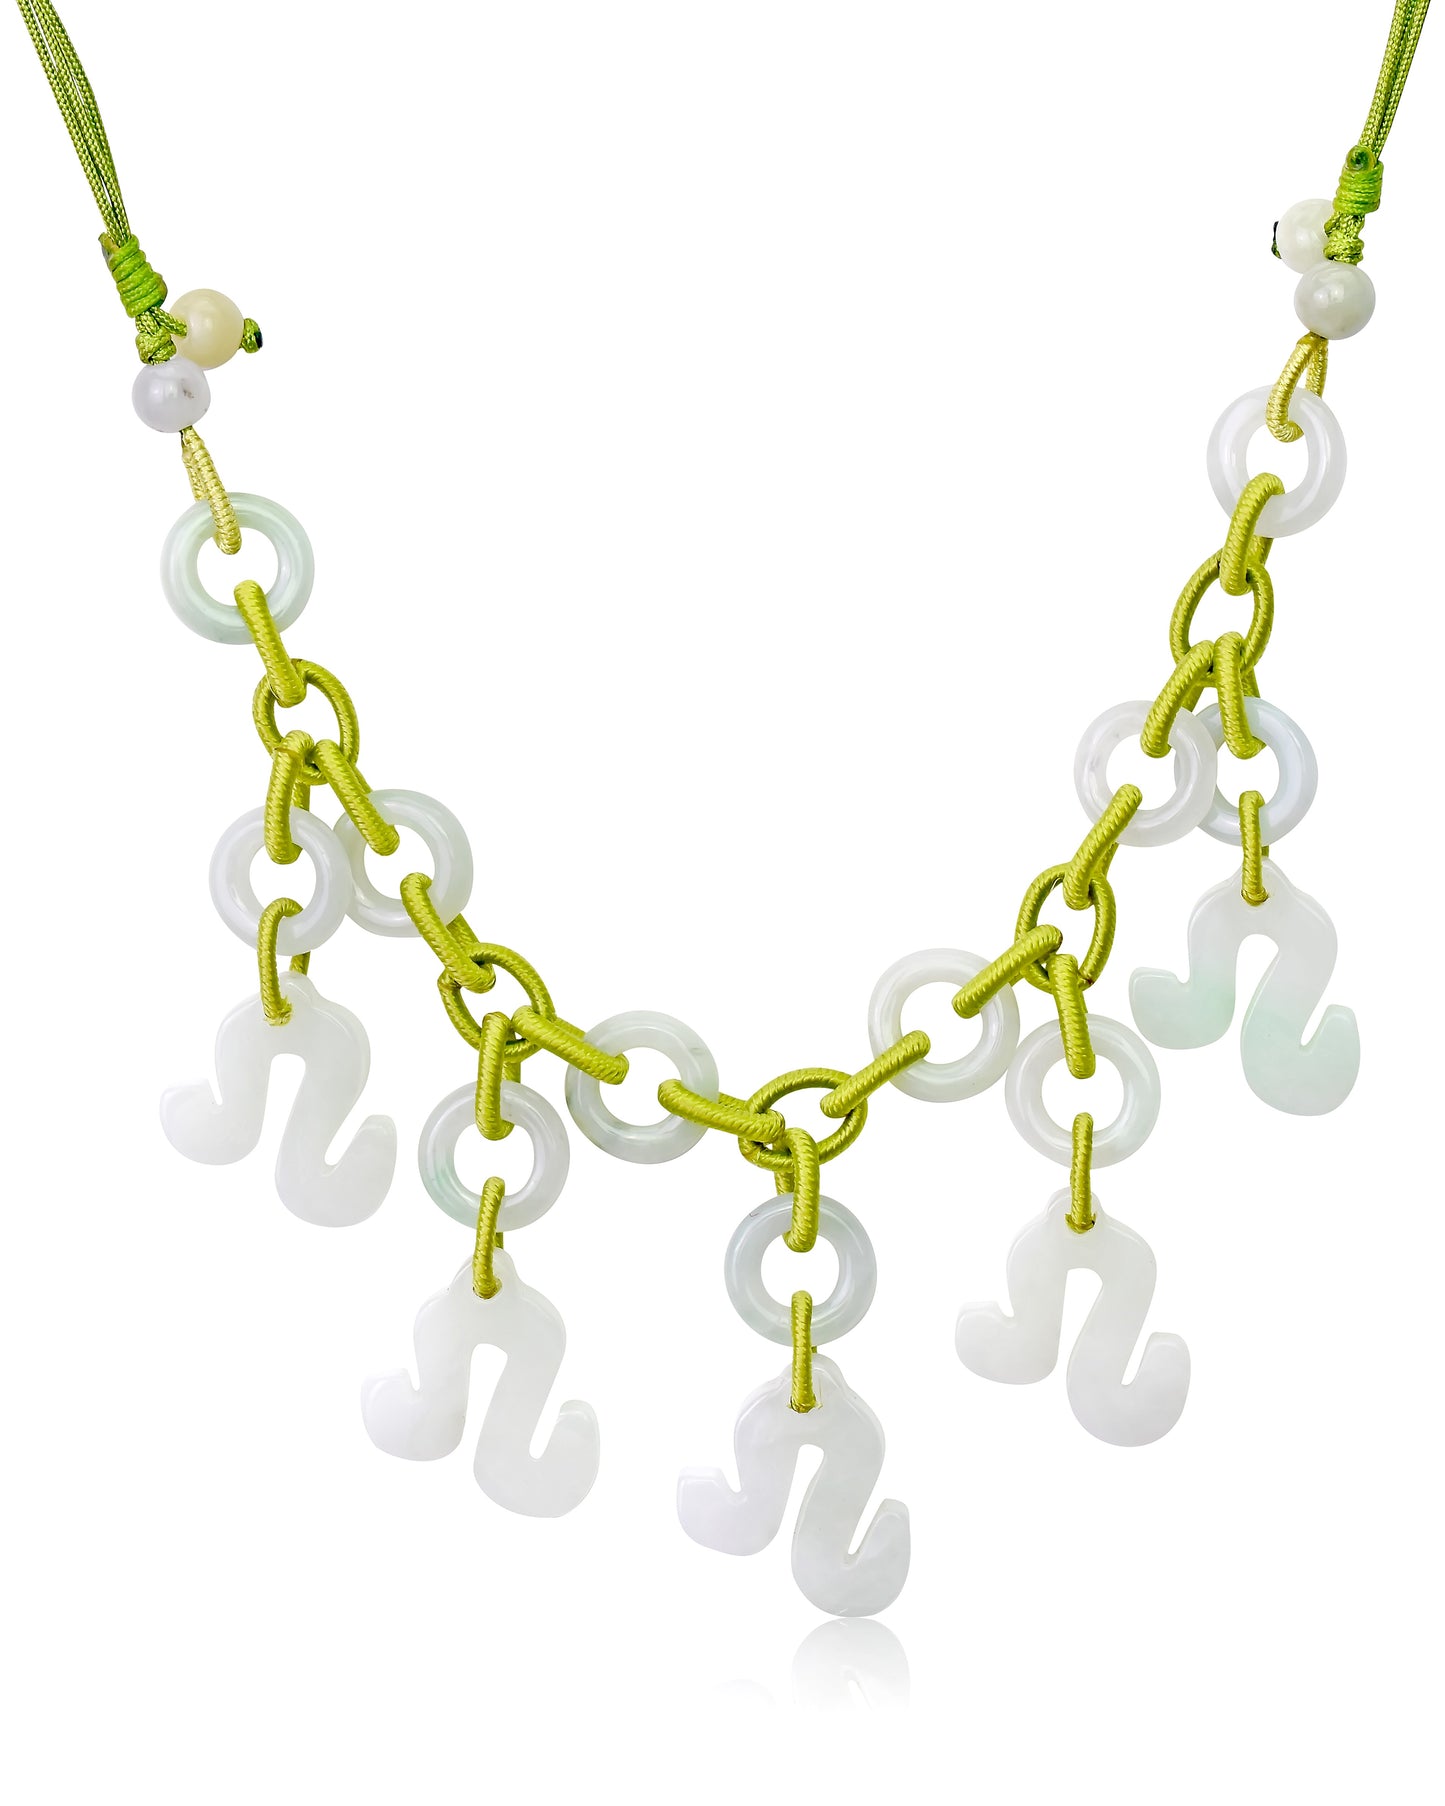 Stand Out with a Uniquely Crafted Leo Handmade Jade Necklace made with Lime Cord